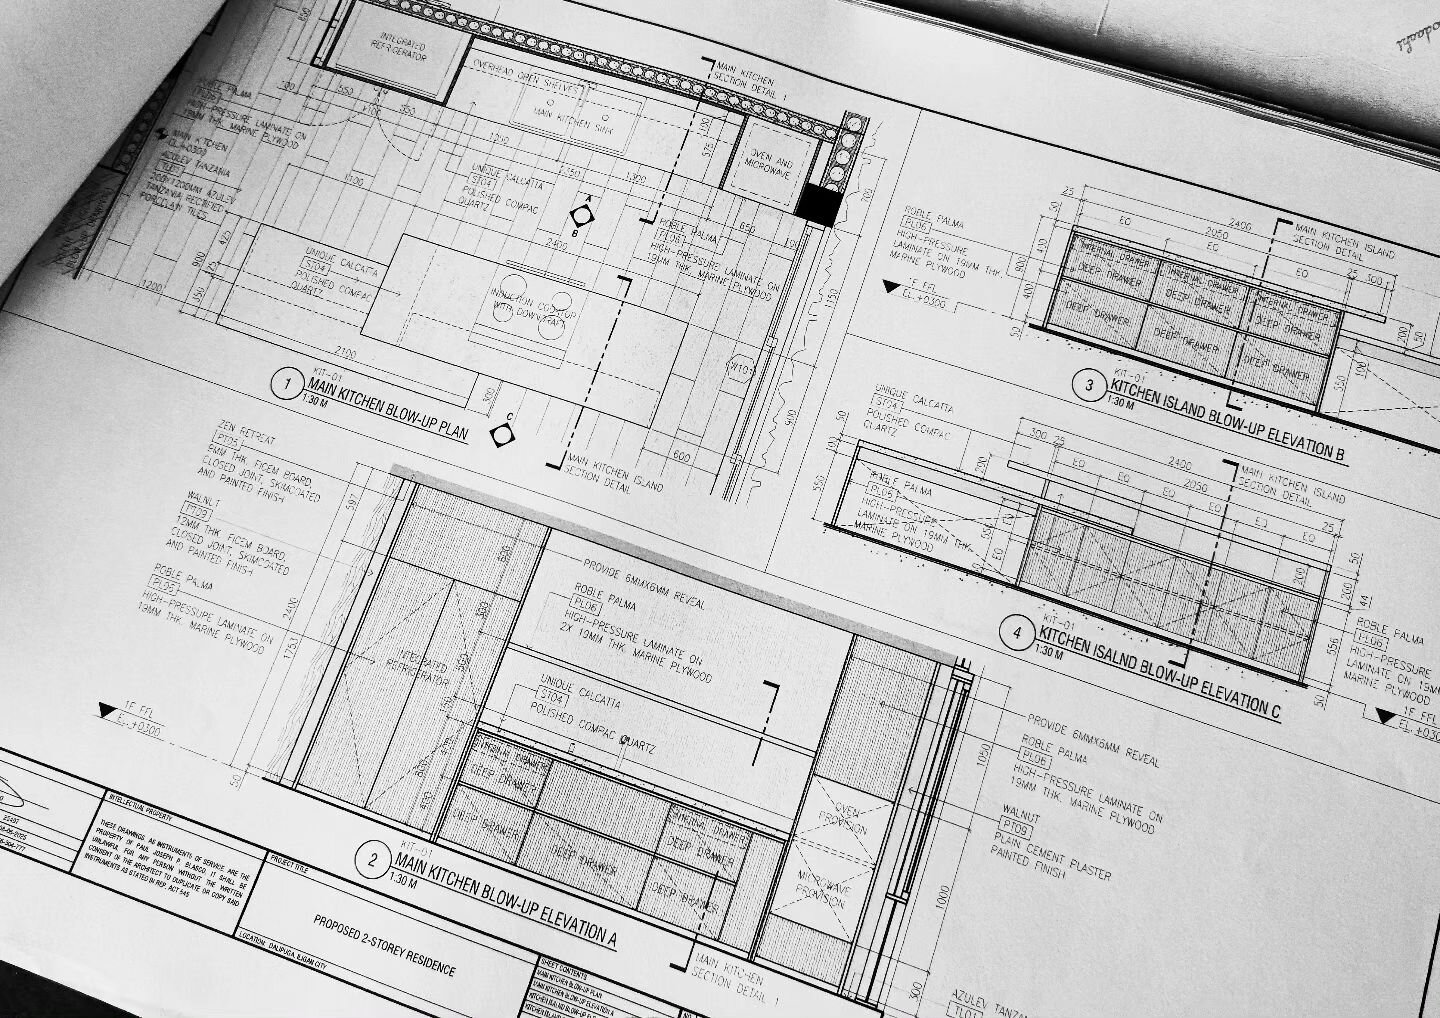 The complete set of construction documents is the final product of a complex and iterative process of sketching, 3D modeling, and rendering. These monochromatic technical drawings represent months of creative design process that reflect our vision an